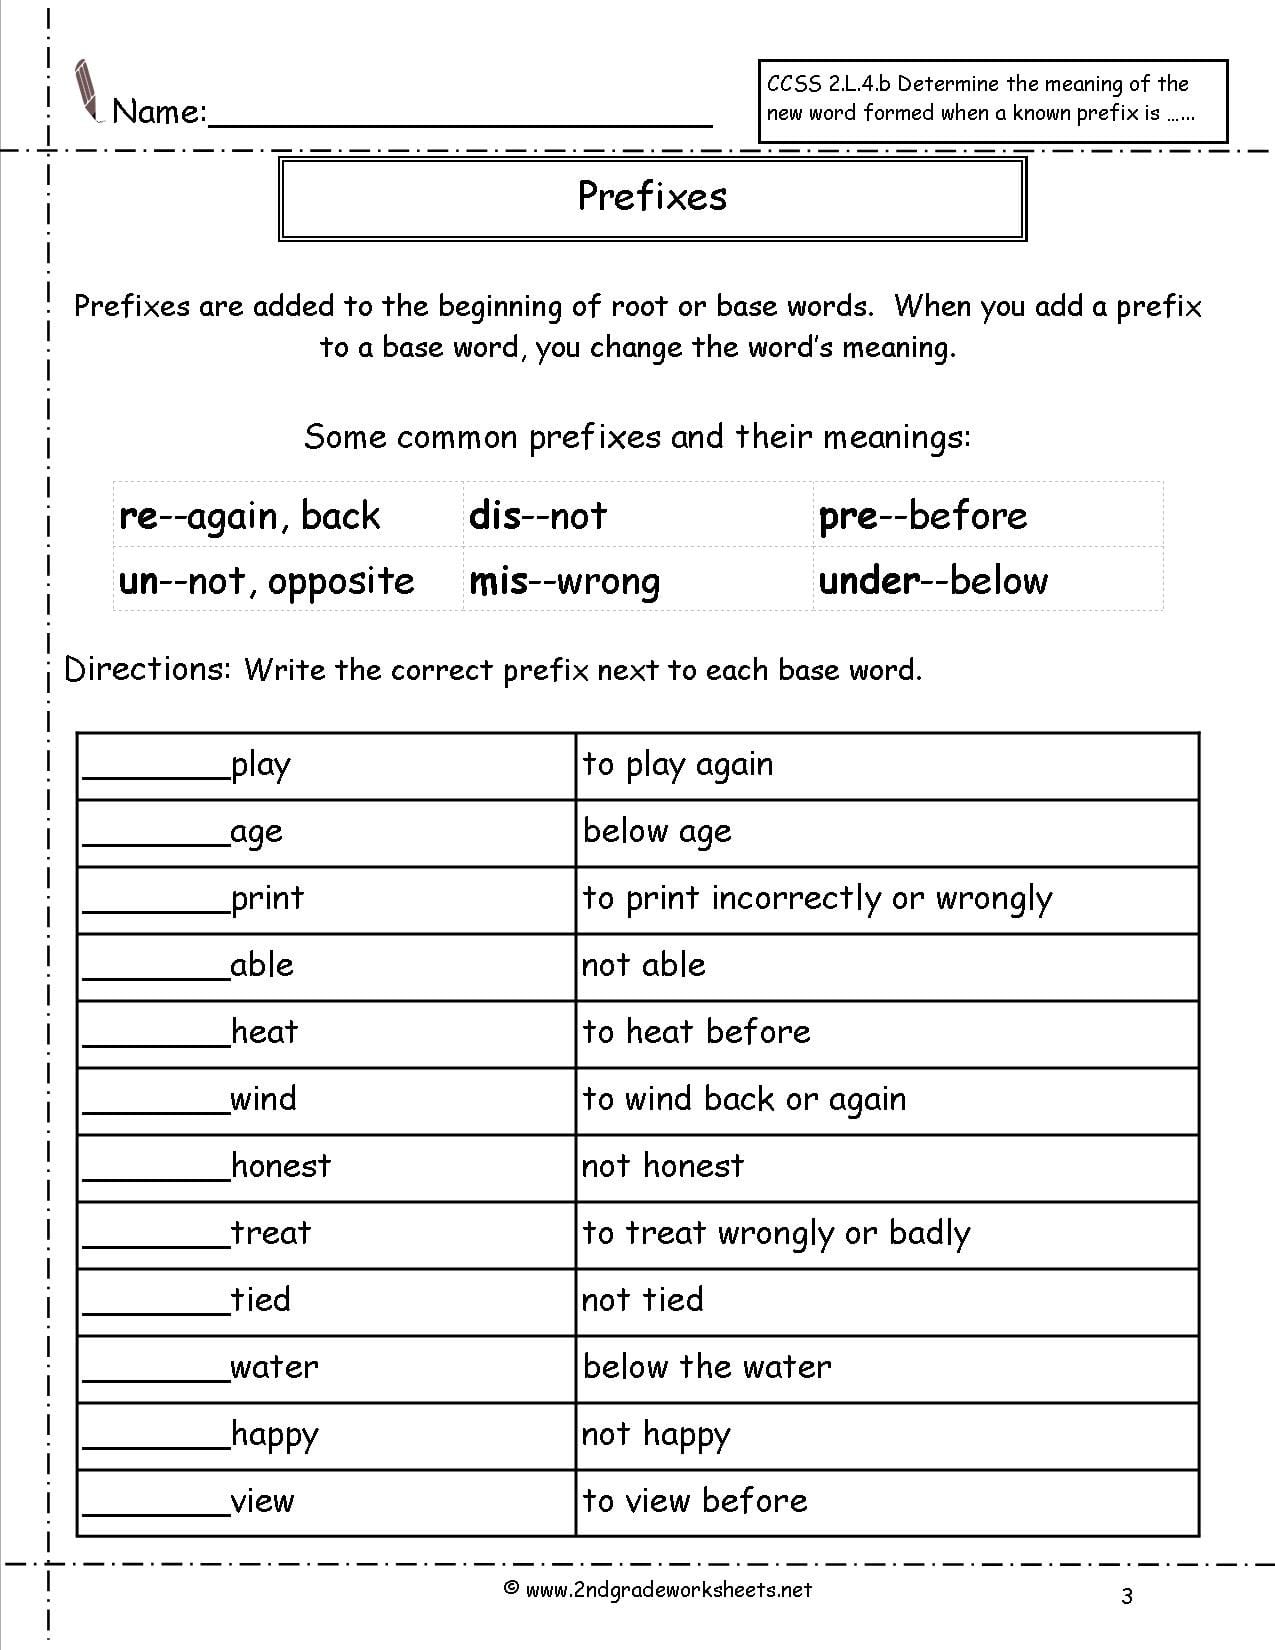 Free Printable Prefix And Suffix Worksheets Middle School